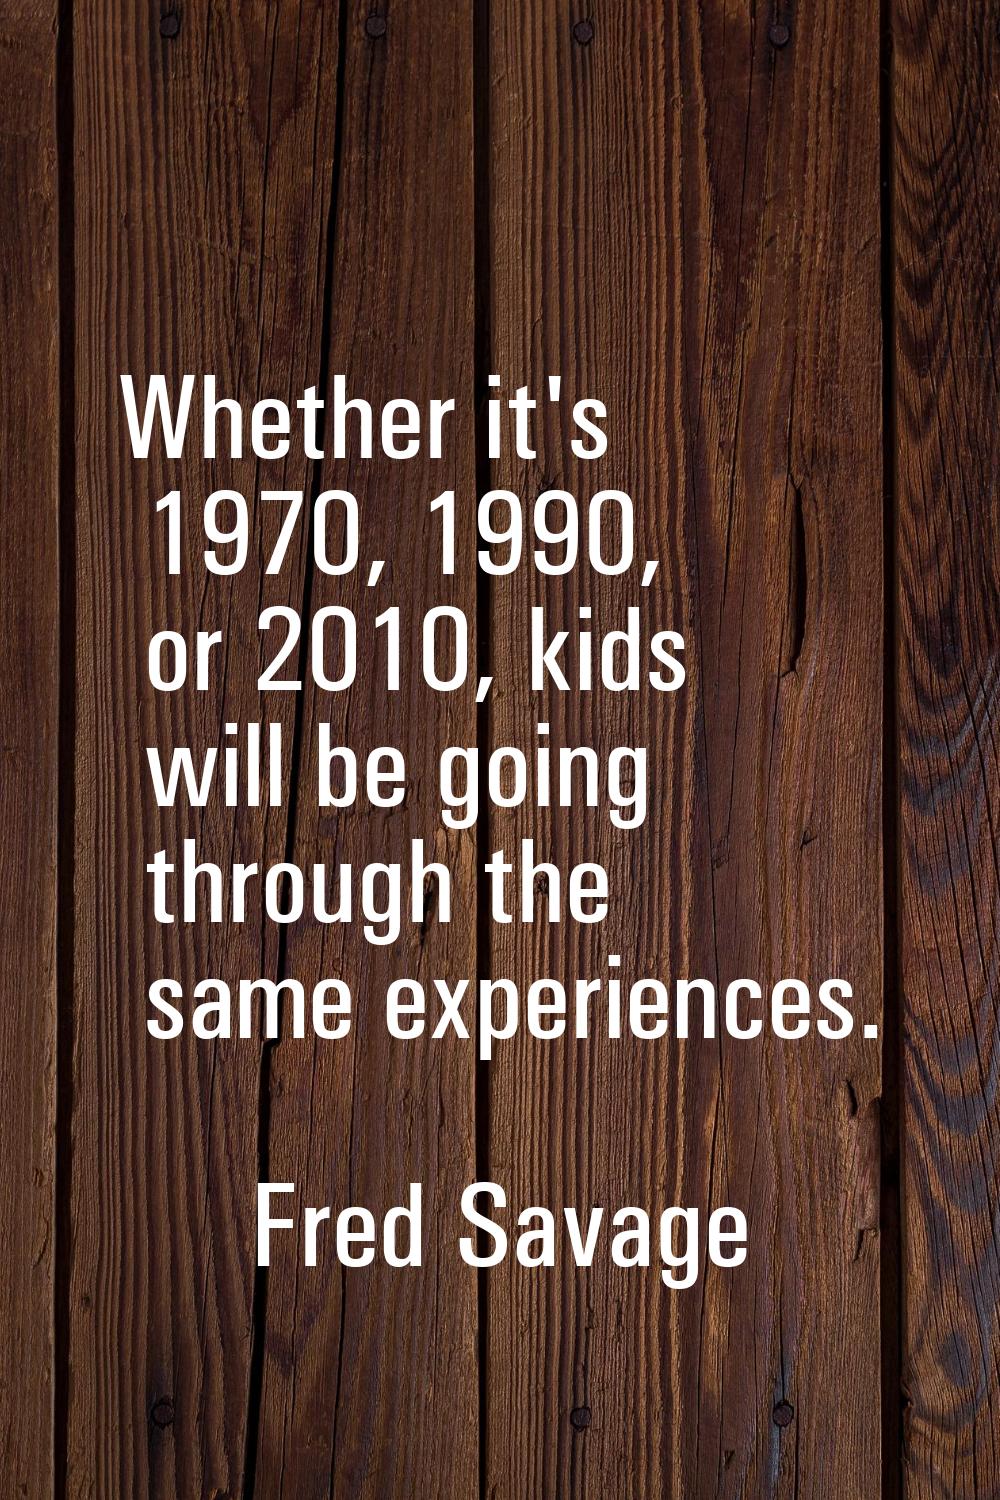 Whether it's 1970, 1990, or 2010, kids will be going through the same experiences.